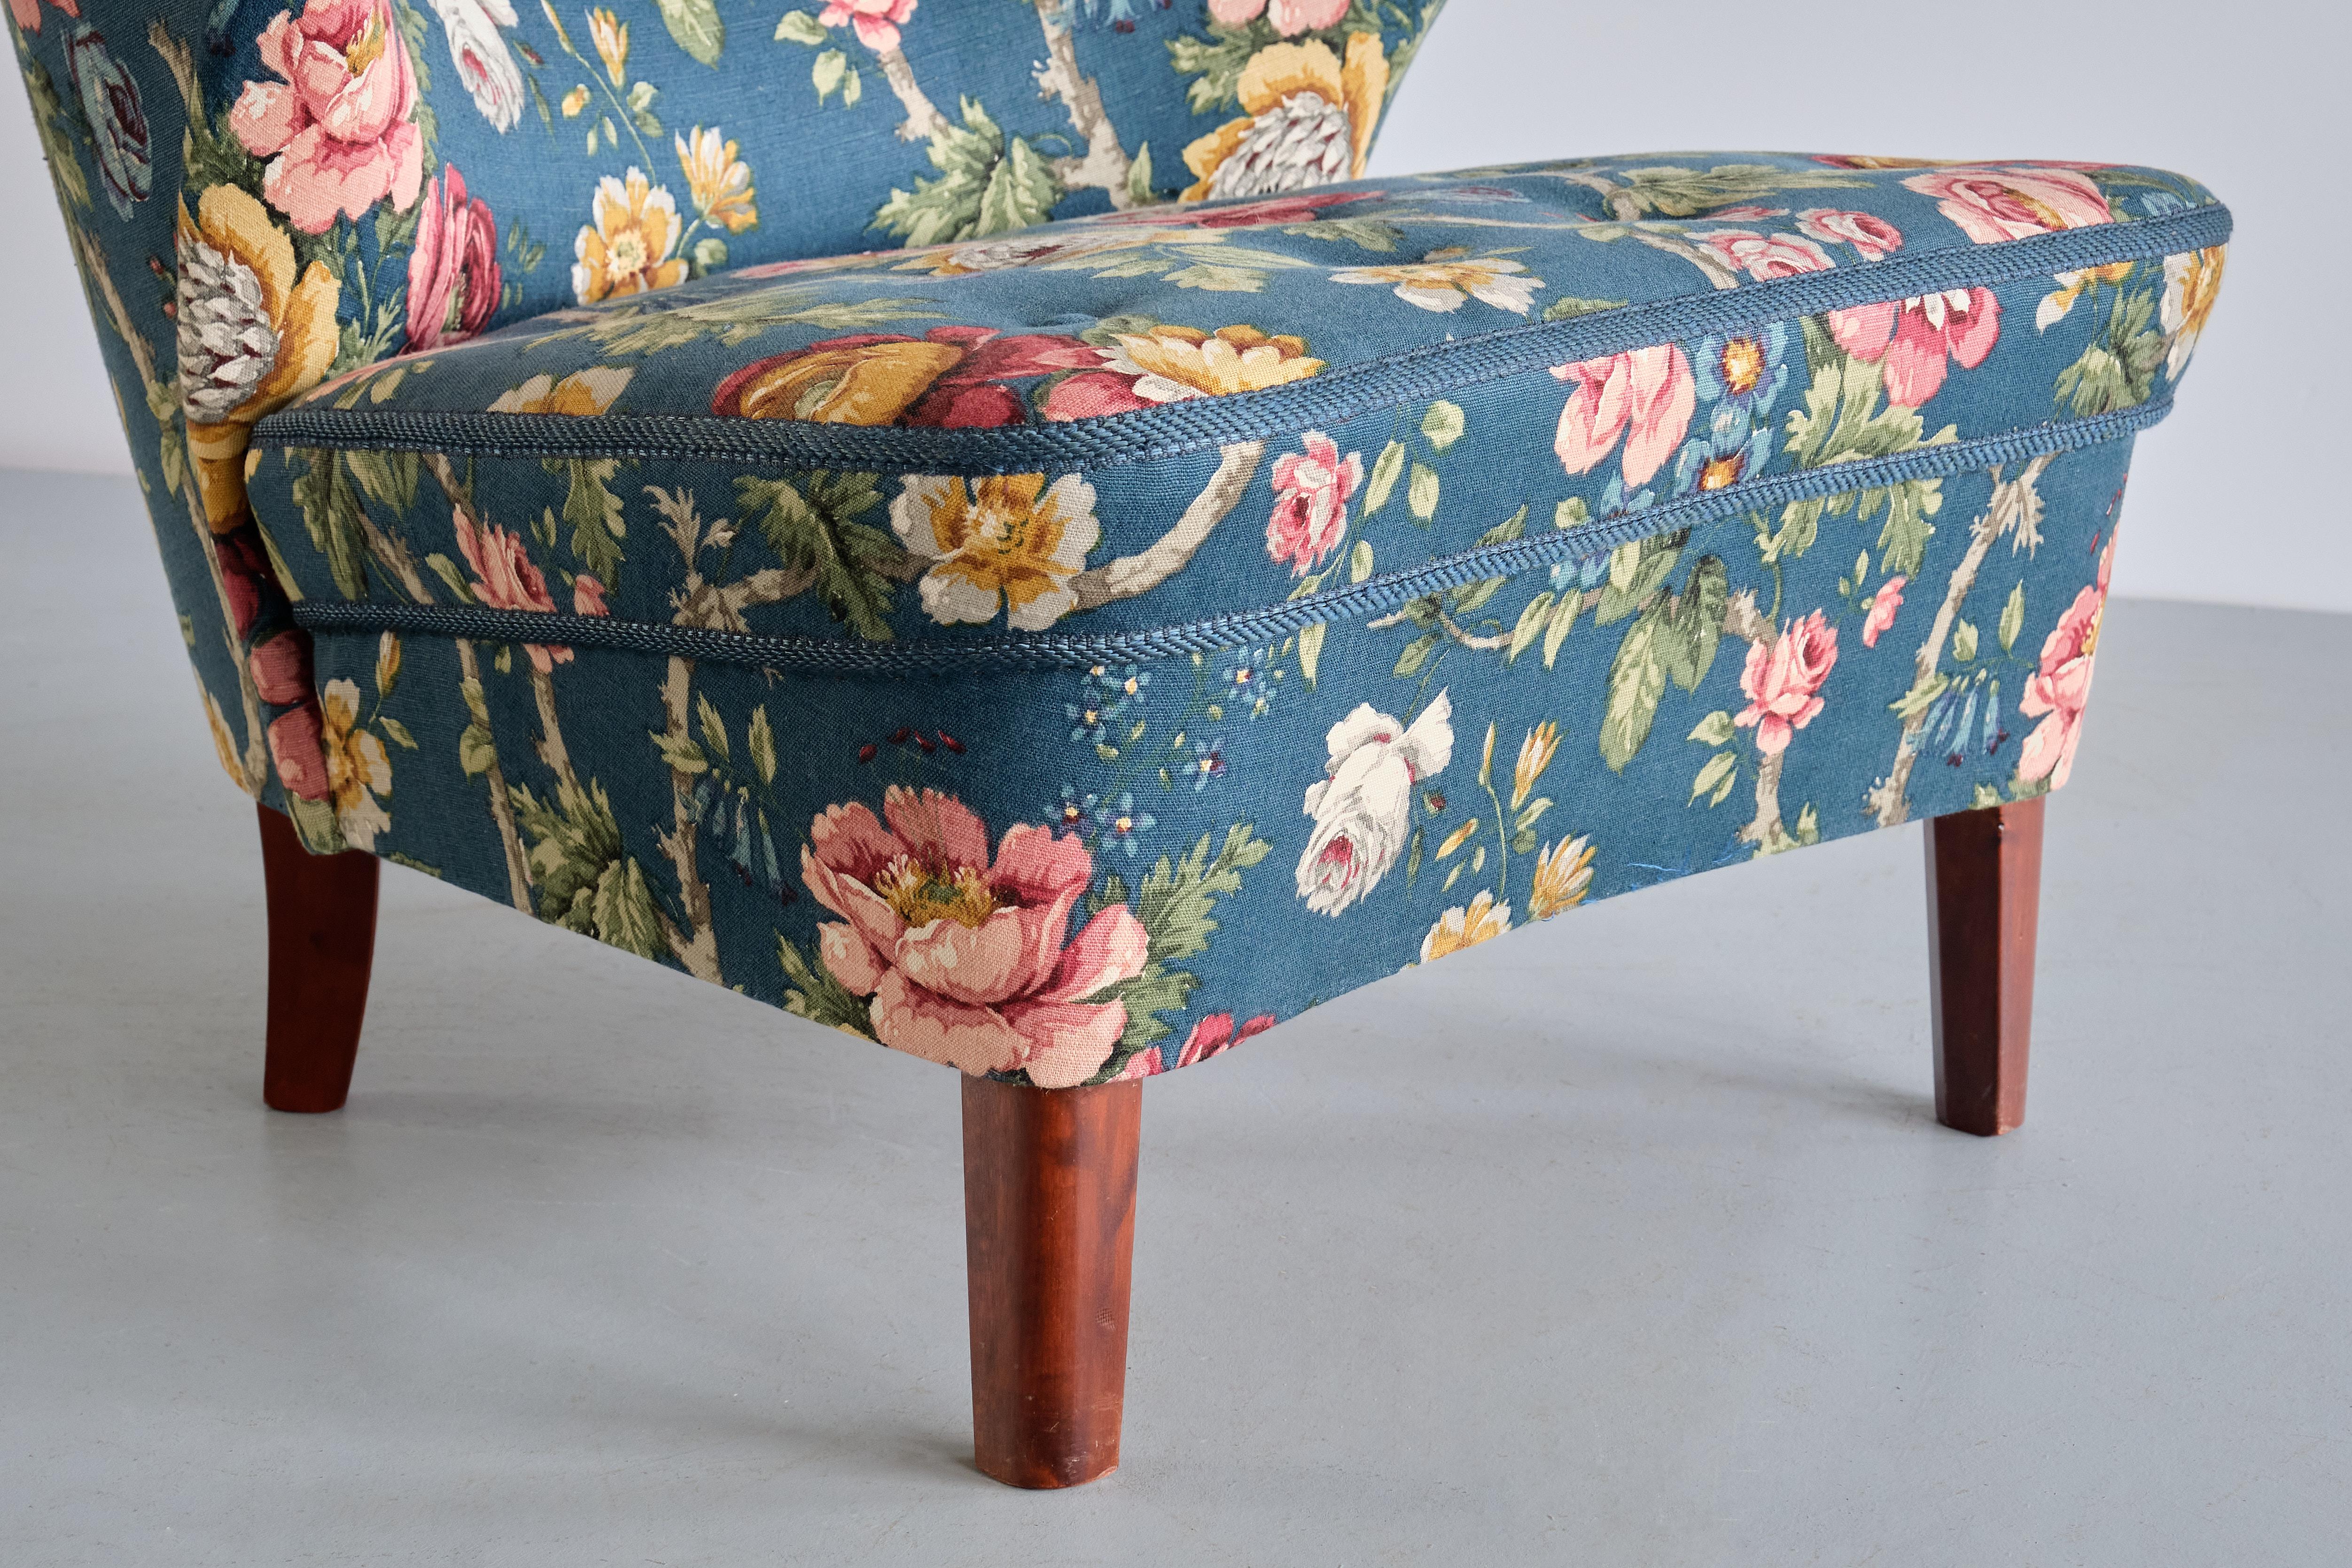 Mid-20th Century Gösta Jonsson Lounge Chair in Floral Fabric and Birch, Sweden, 1940s For Sale